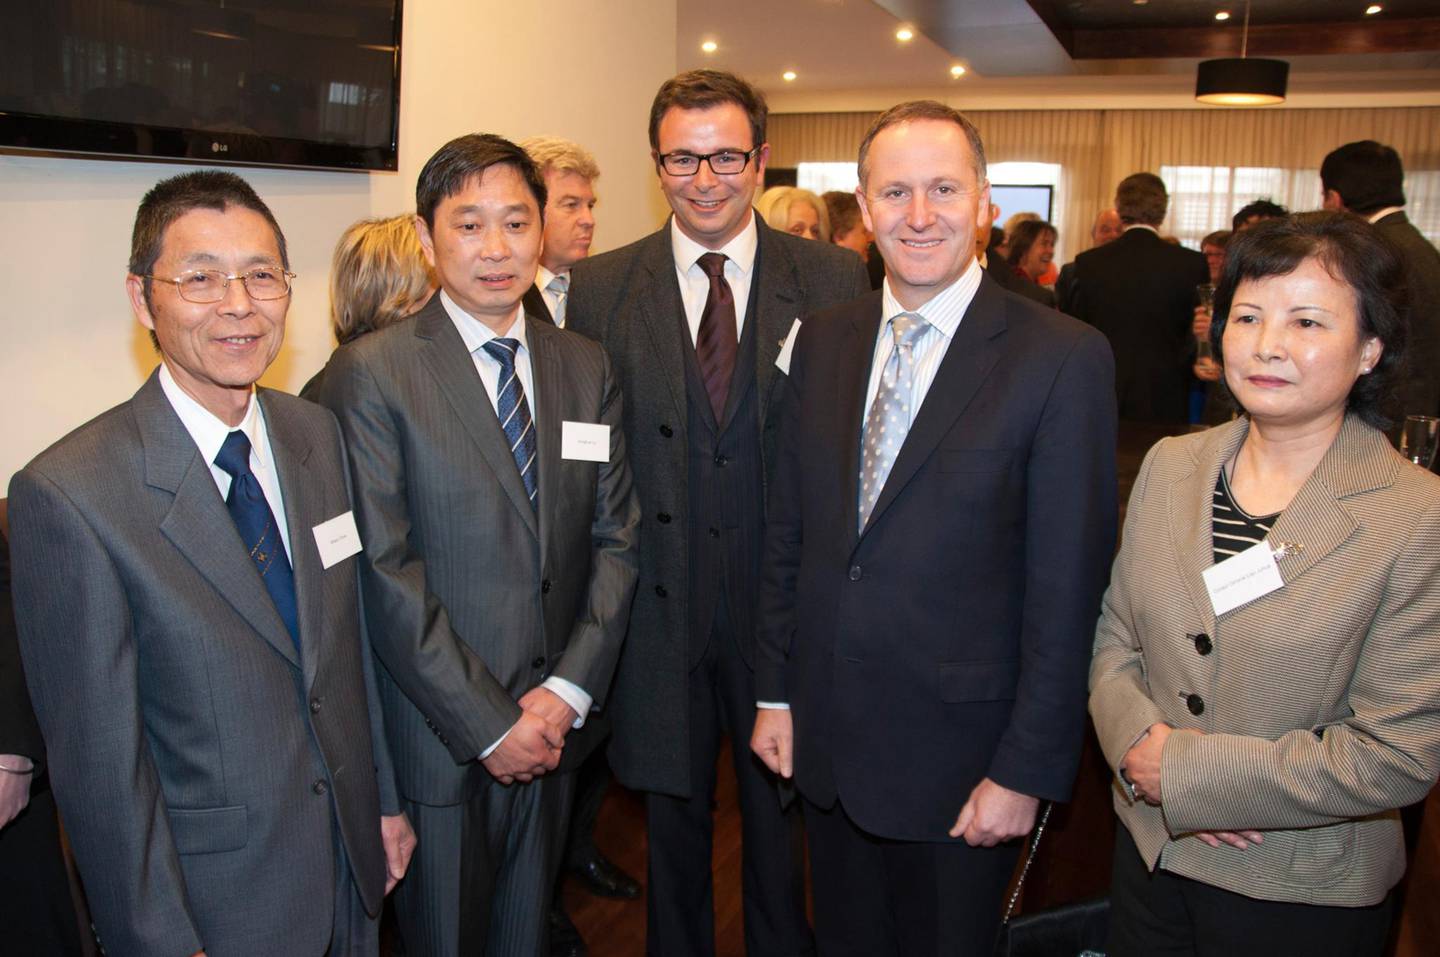 Prime Minister John Key at the opening of the Boulevard Hotel with (from left) Wilson Chow, Donghua Liu, Councillor Cameron Brewer and Chinese Consul-General Liao Juhua.